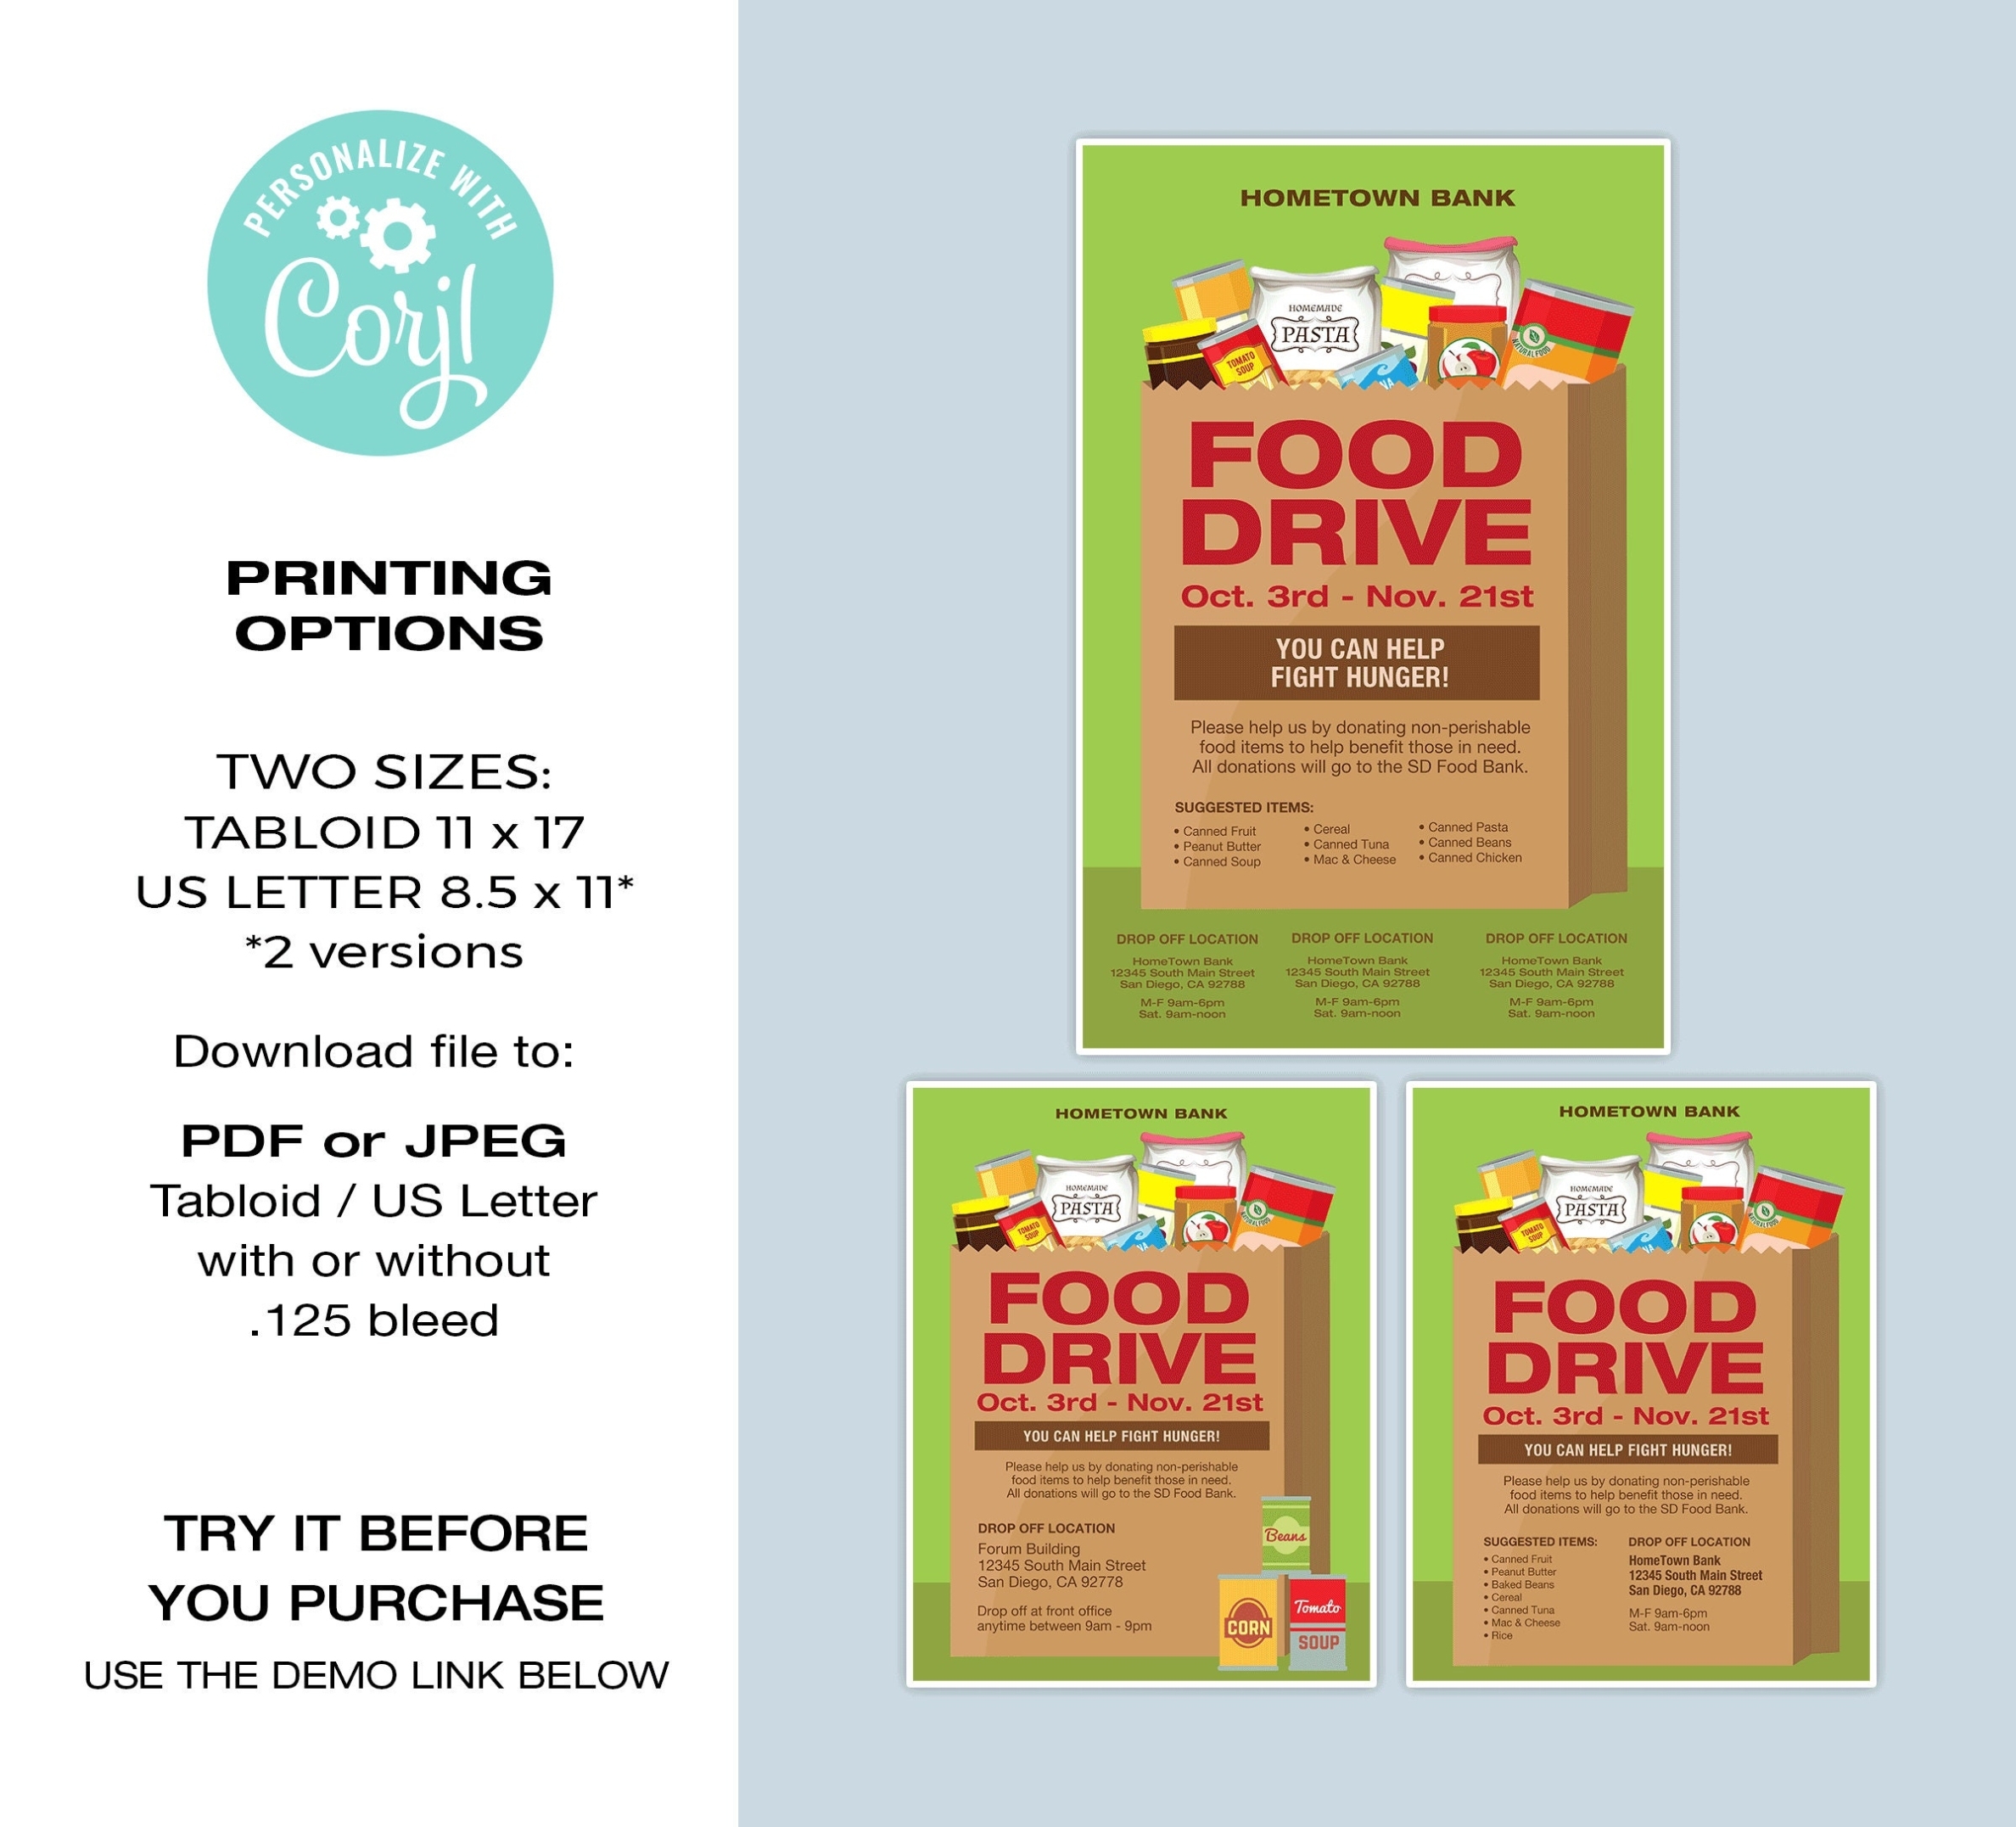 Food Drive Flyer Template Canned Food Drive Flyer | Etsy in Canned Food Drive Flyer Template